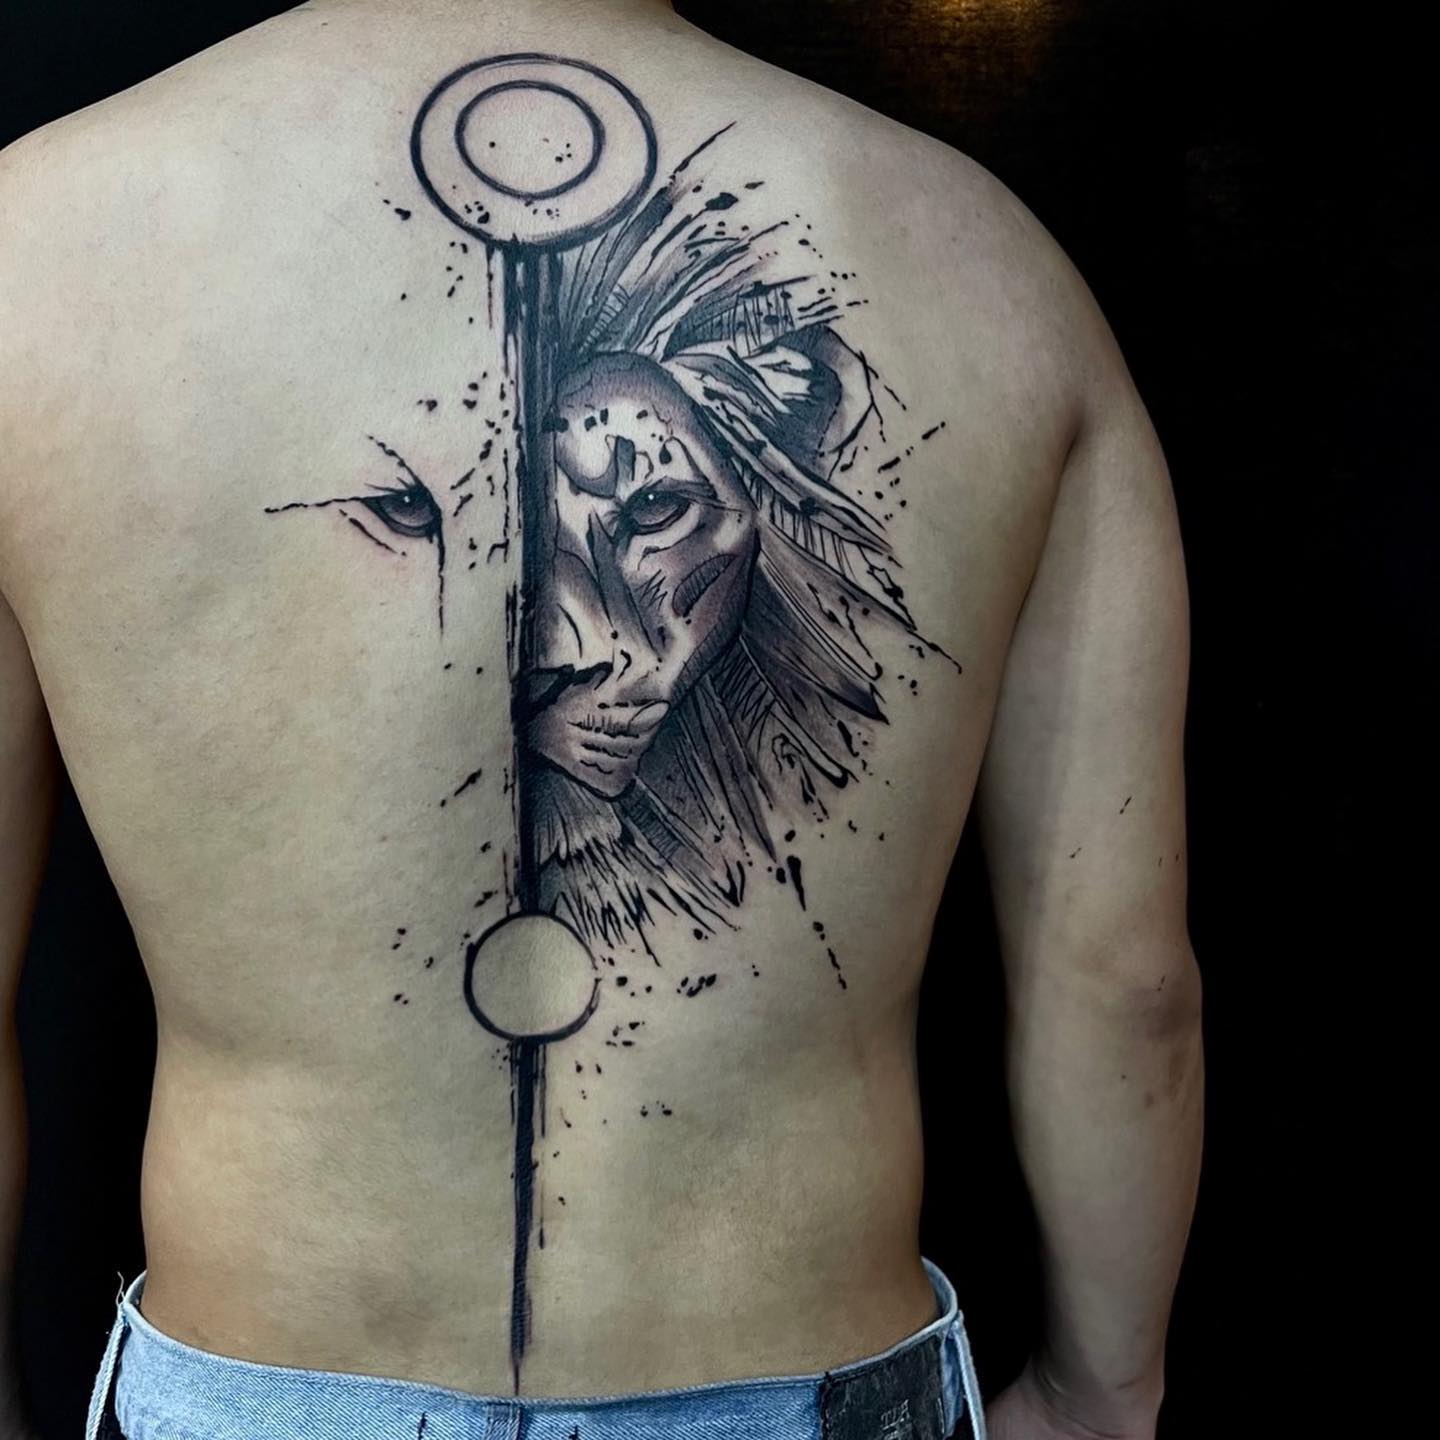 This magnificent lion will look great on your back.